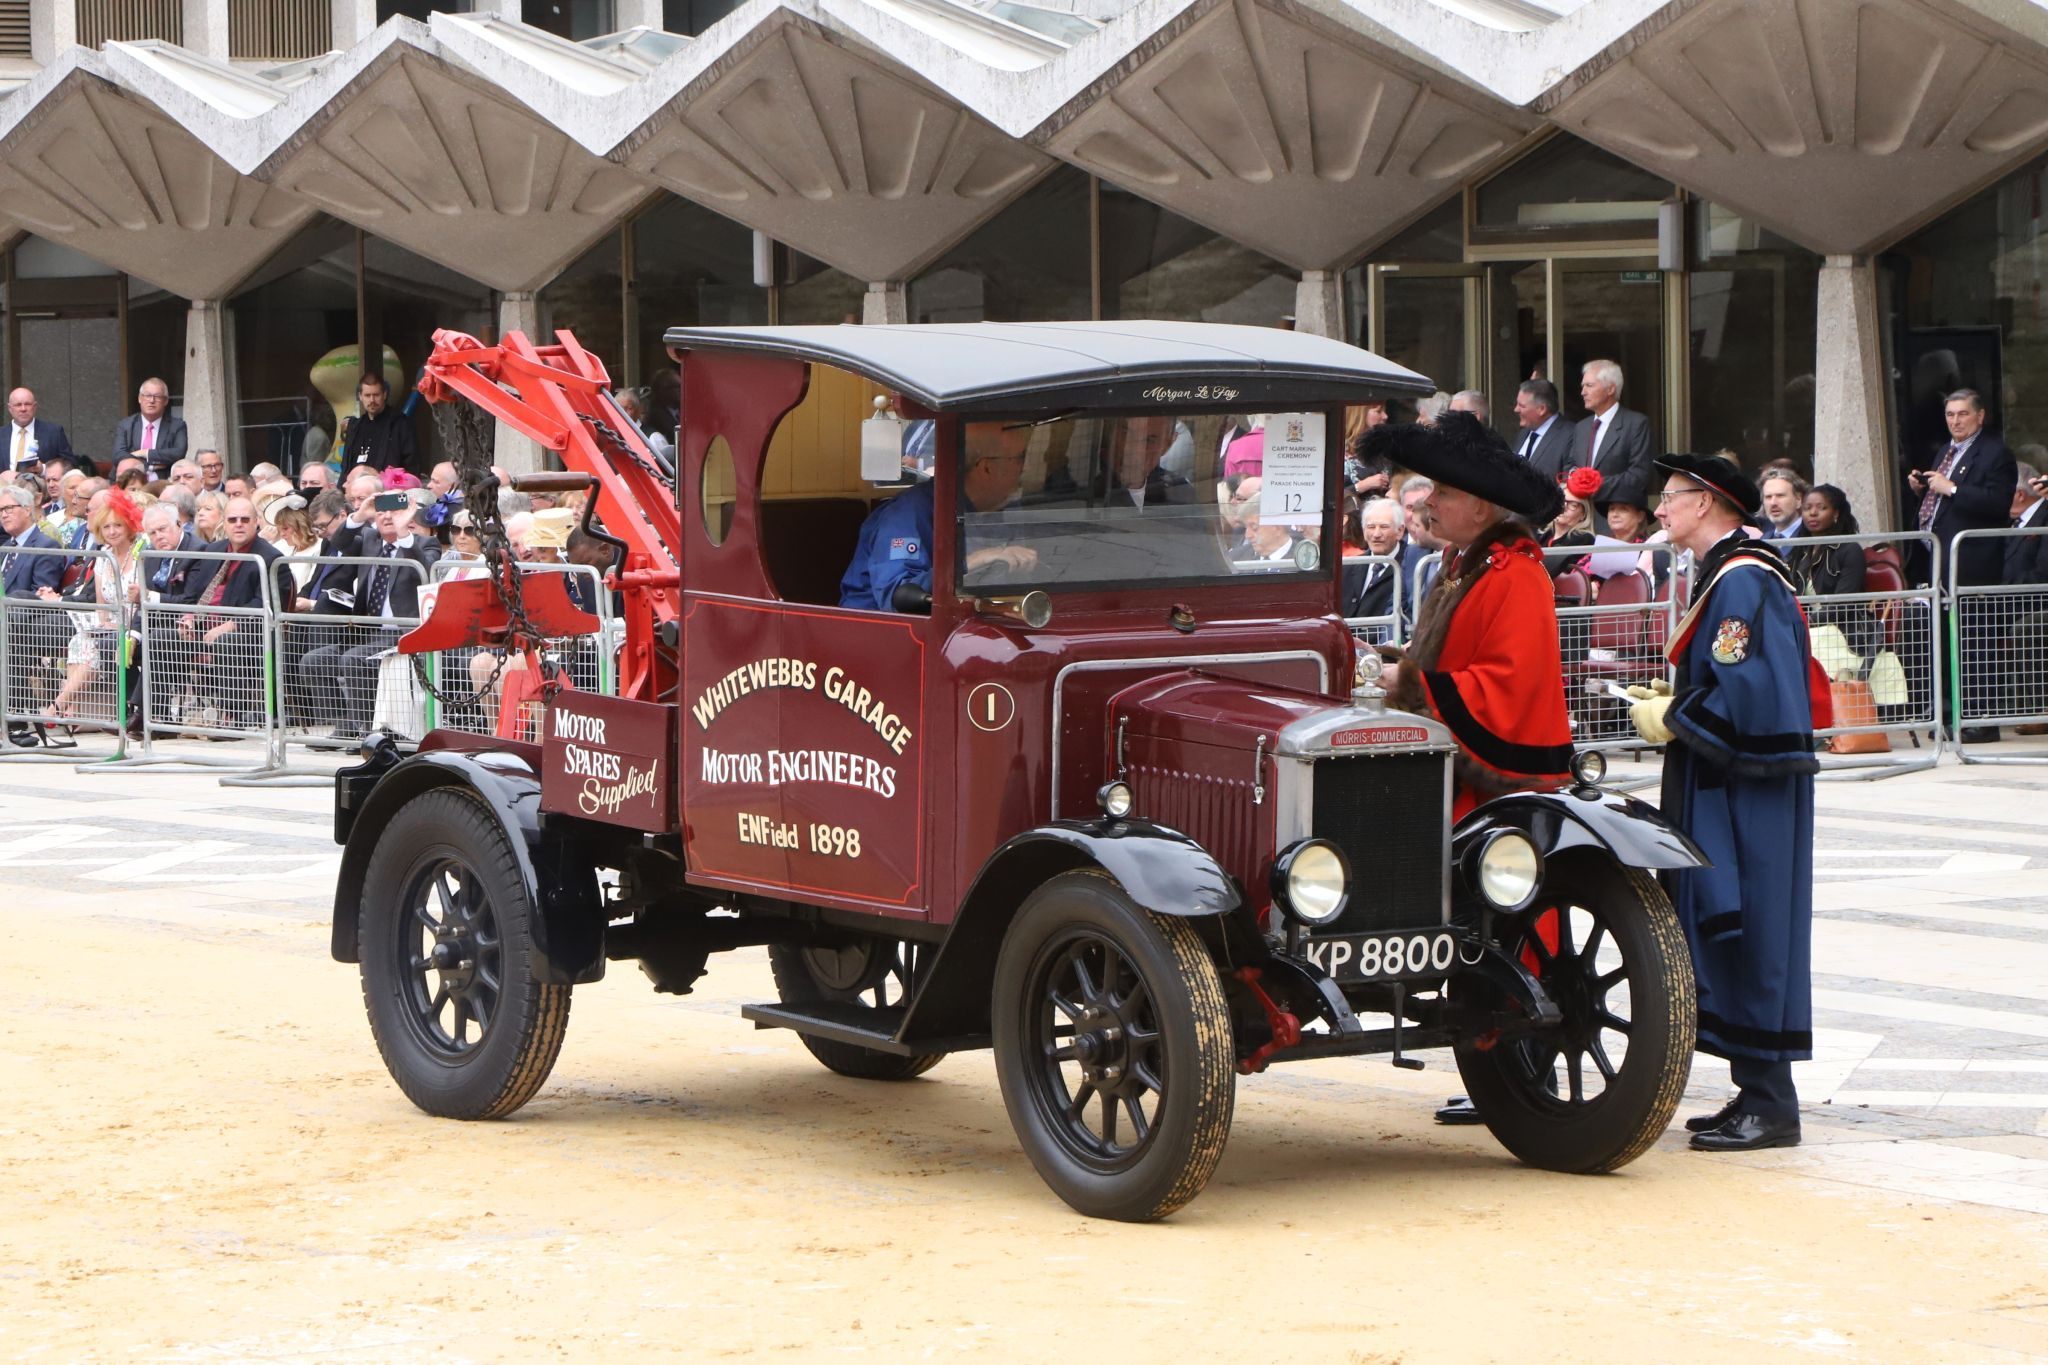 Morris Commercial 1929 KP8800. City of London 2023 Cart Marking in Guildhall Yard on 22-Jul-2023. Hosted by the Worshipful Company of Carmen with the Lord Mayor of the City of London in attendance. Wooden plates on the vehicles are branded with hot irons to allow them to ply for trade in the Square Mile. Another of the City Livery Company's annual ceremonies.